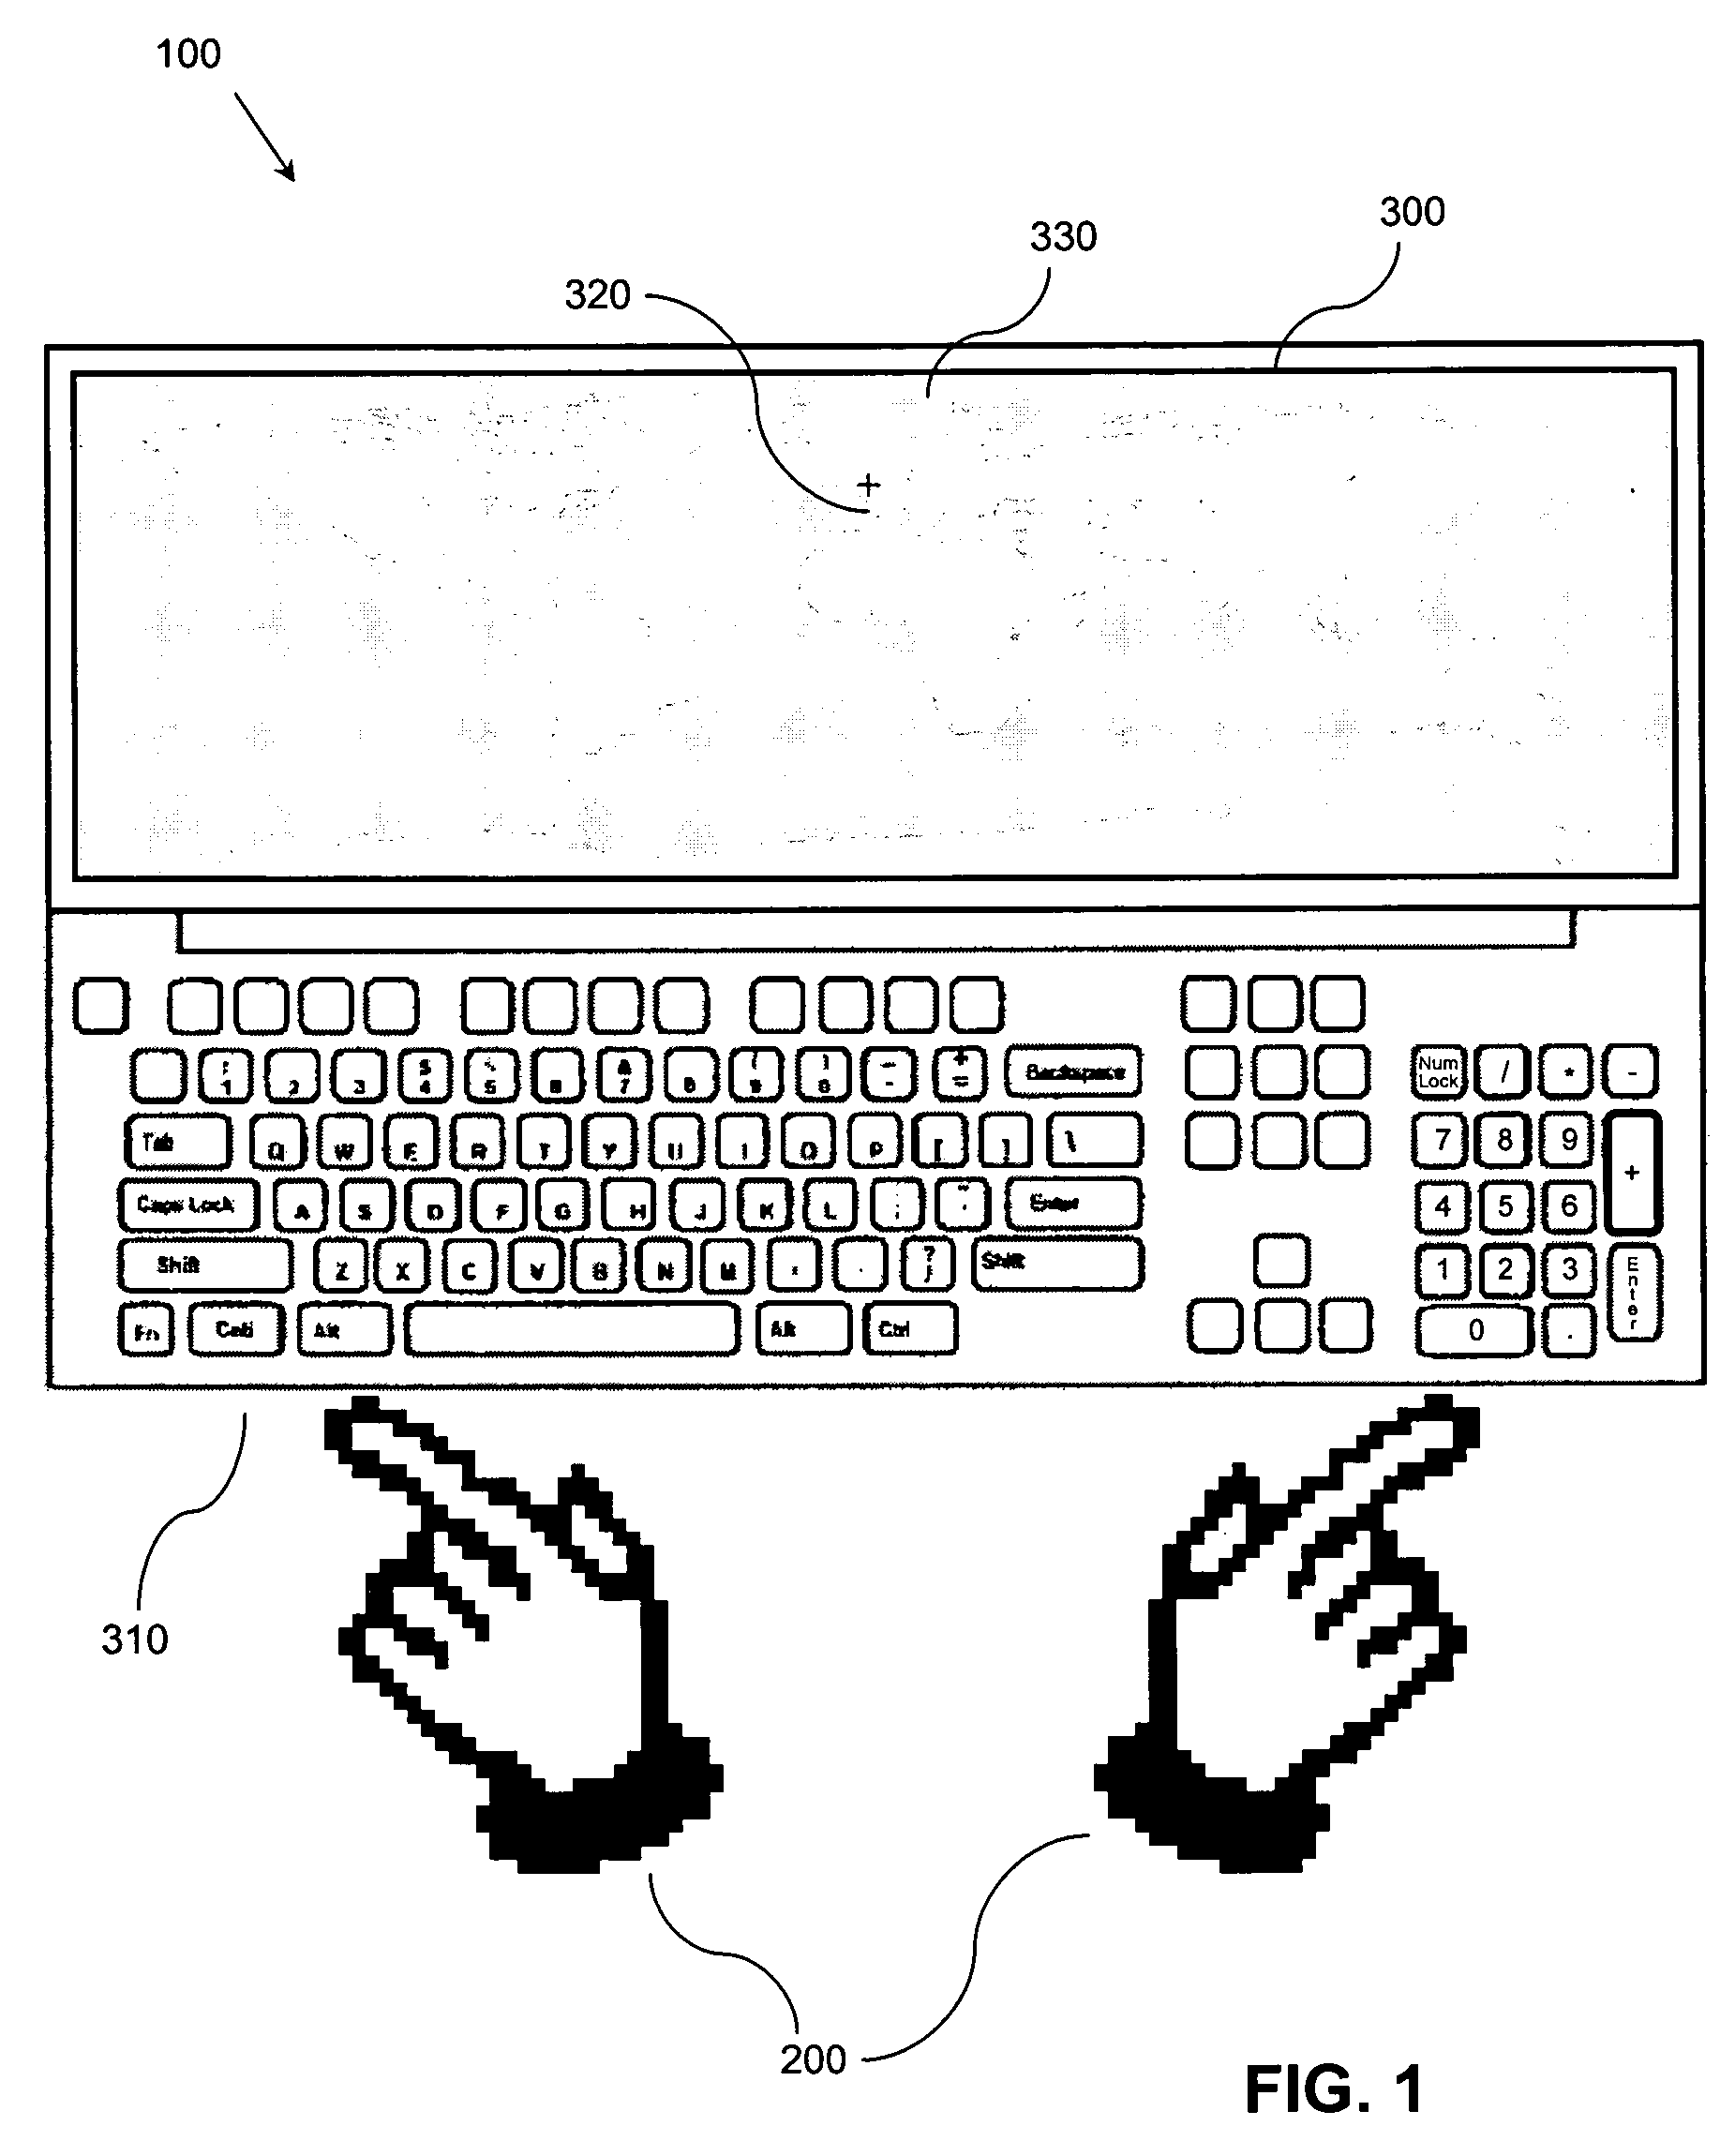 System and method for data entry